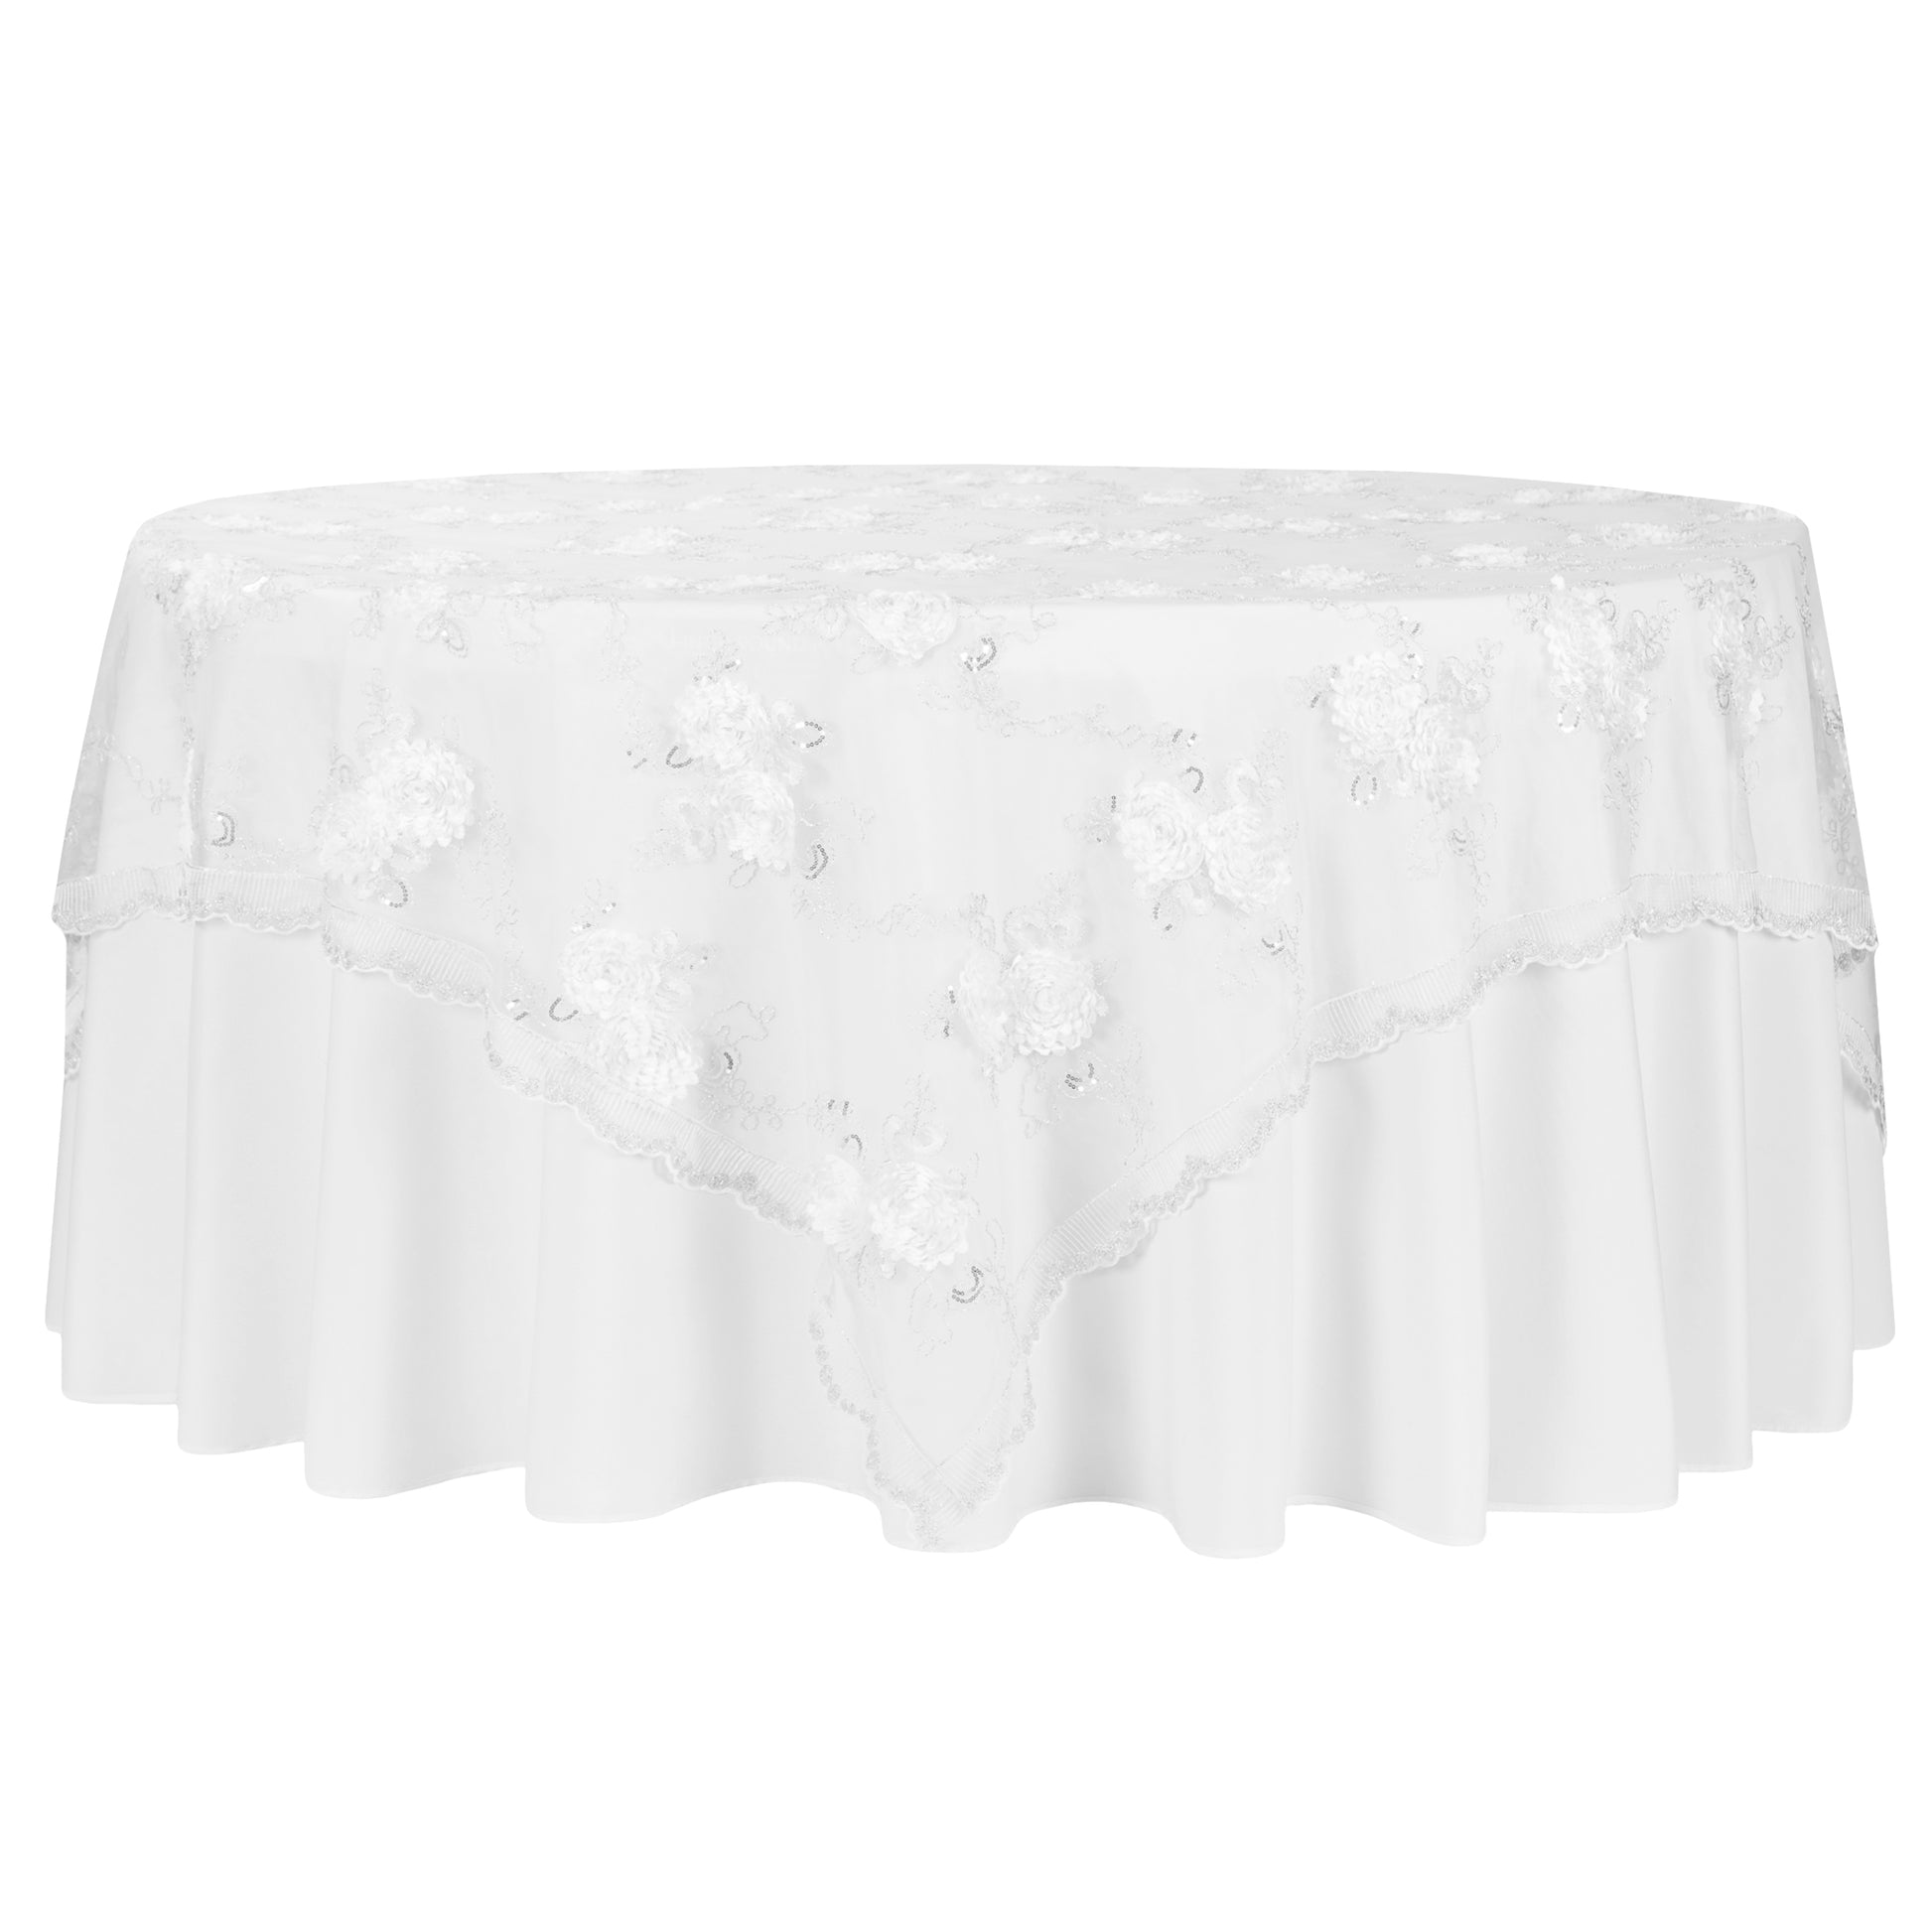 Vintage Veil Embroidery 90"x90" Square Table Overlay Topper - White - CV Linens